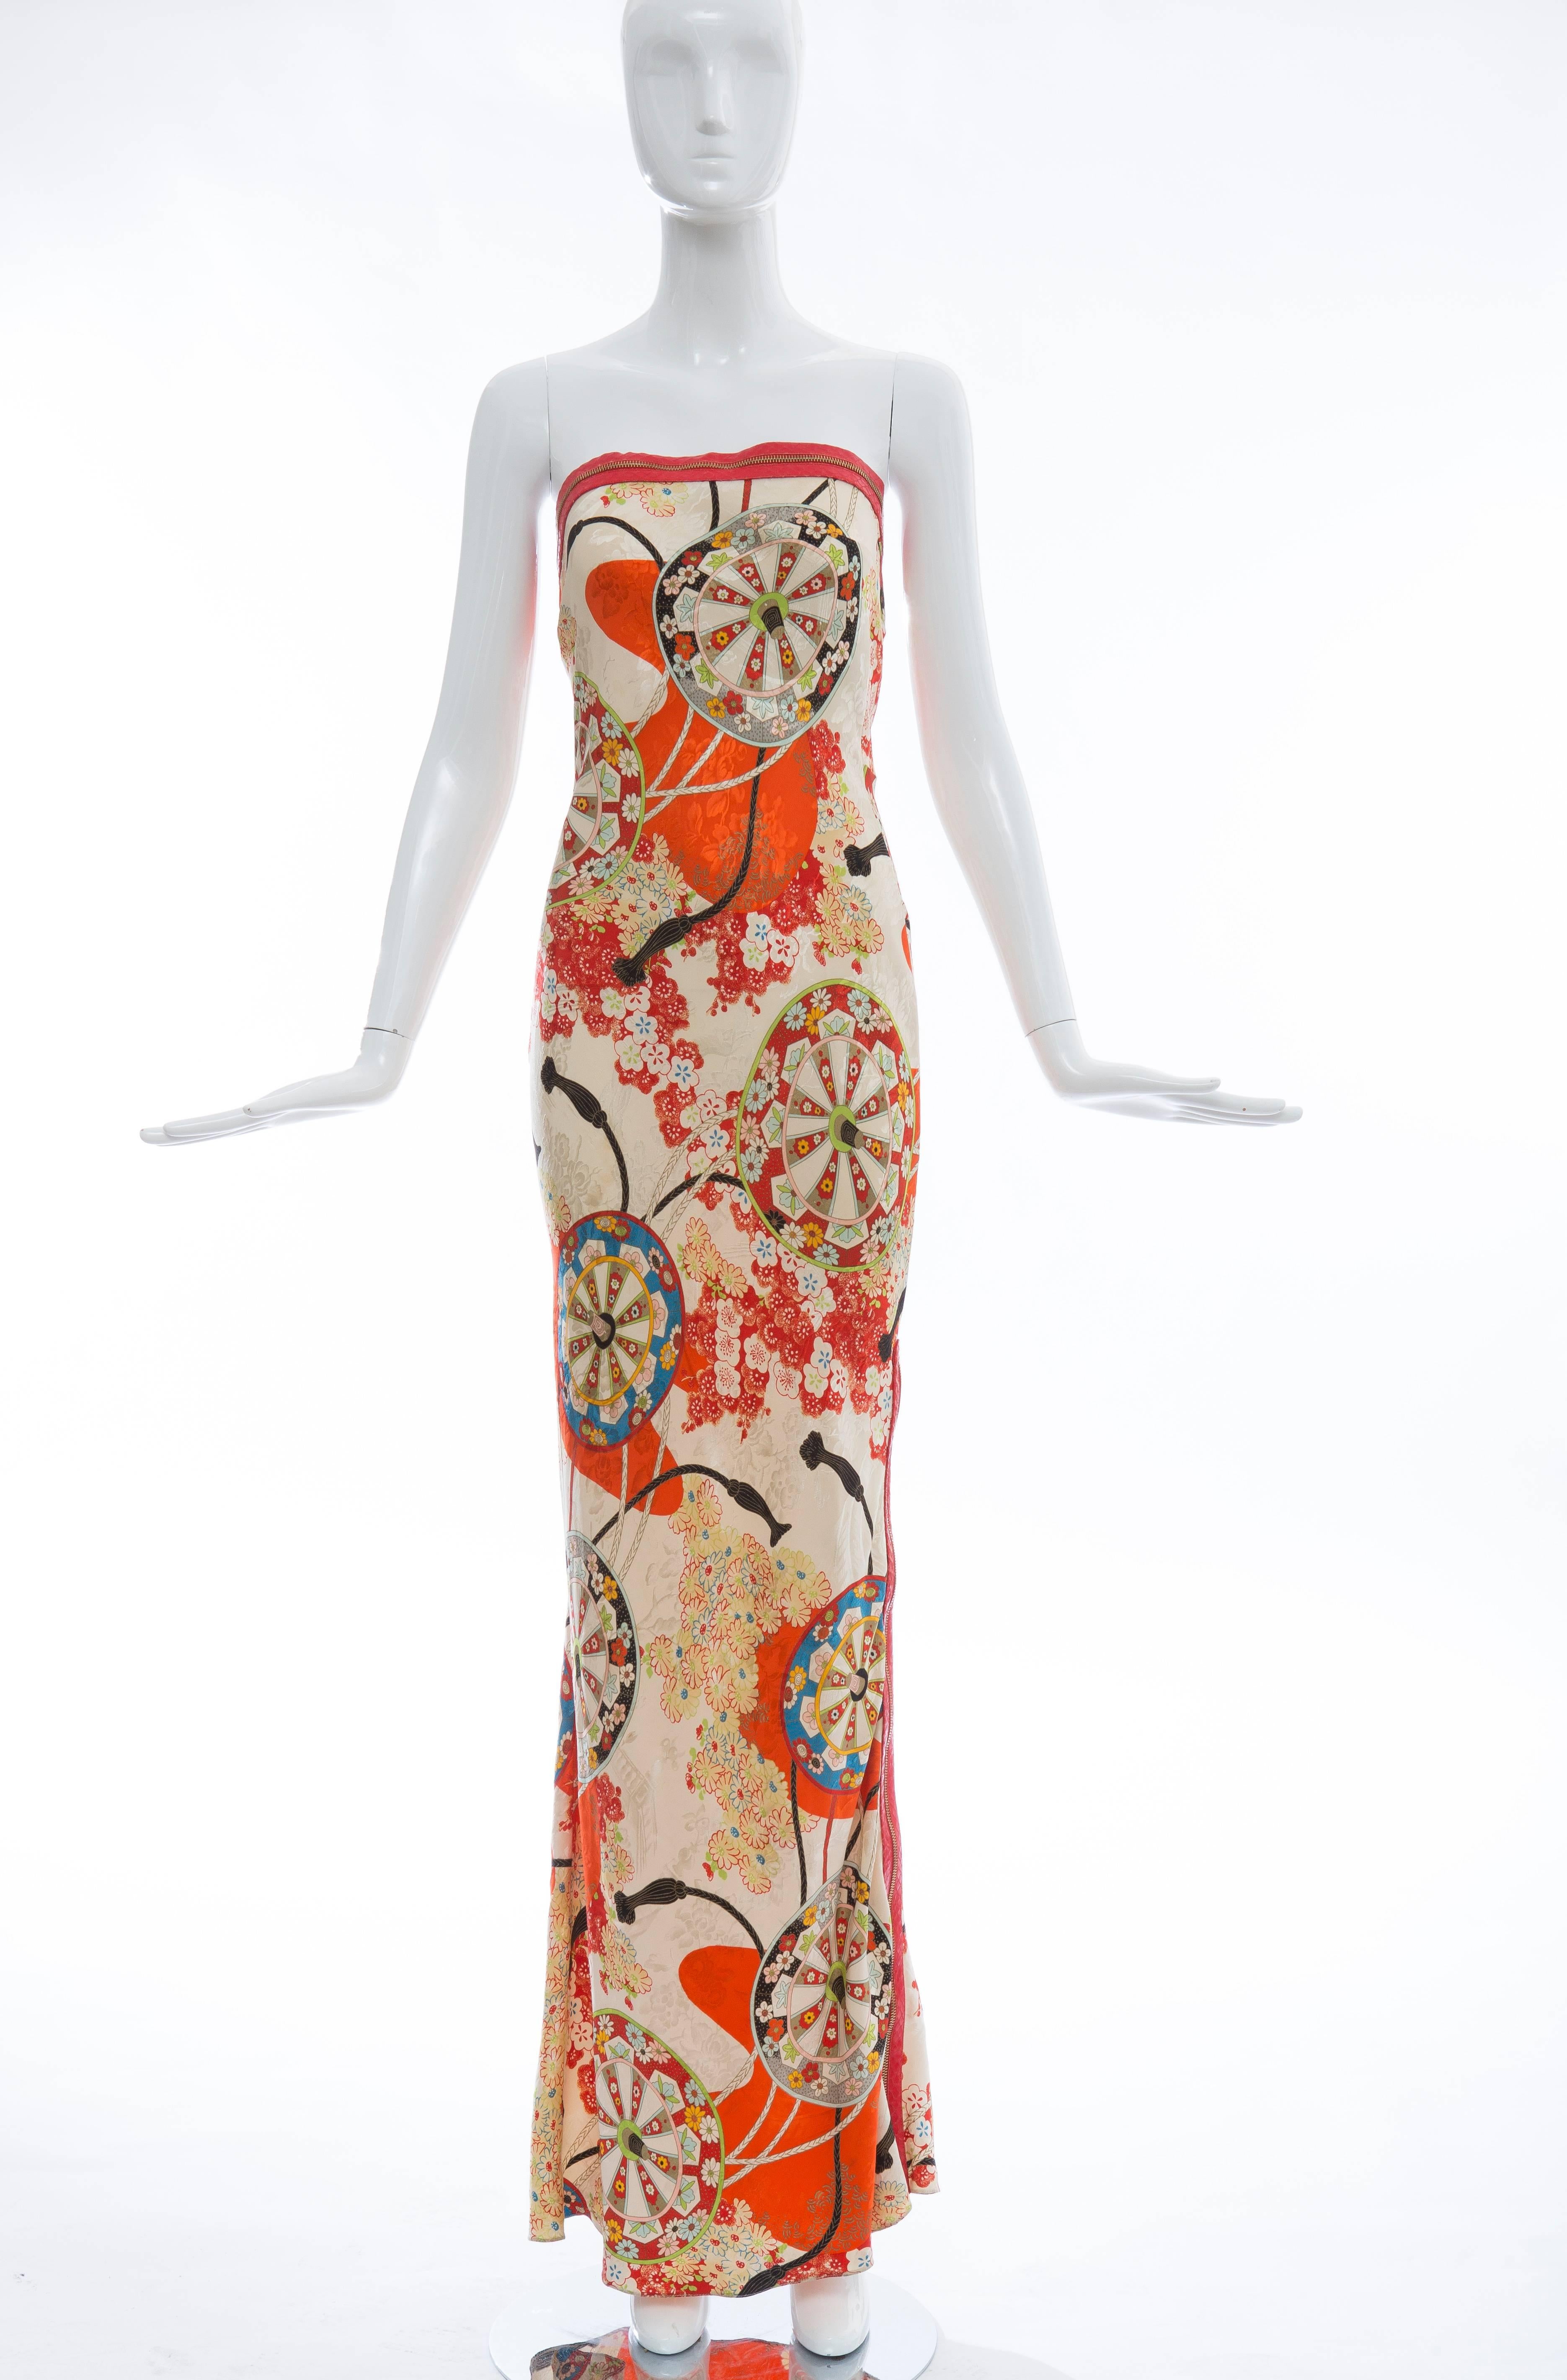 John Galliano for Christian Dior, Spring-Summer 2001 silk floral print strapless dress with leather trim, tonal stitching and zip and button closures at back.

FR.36
US. 4
Bust: 32", Waist: 26",  Hip: 36", Length: 40